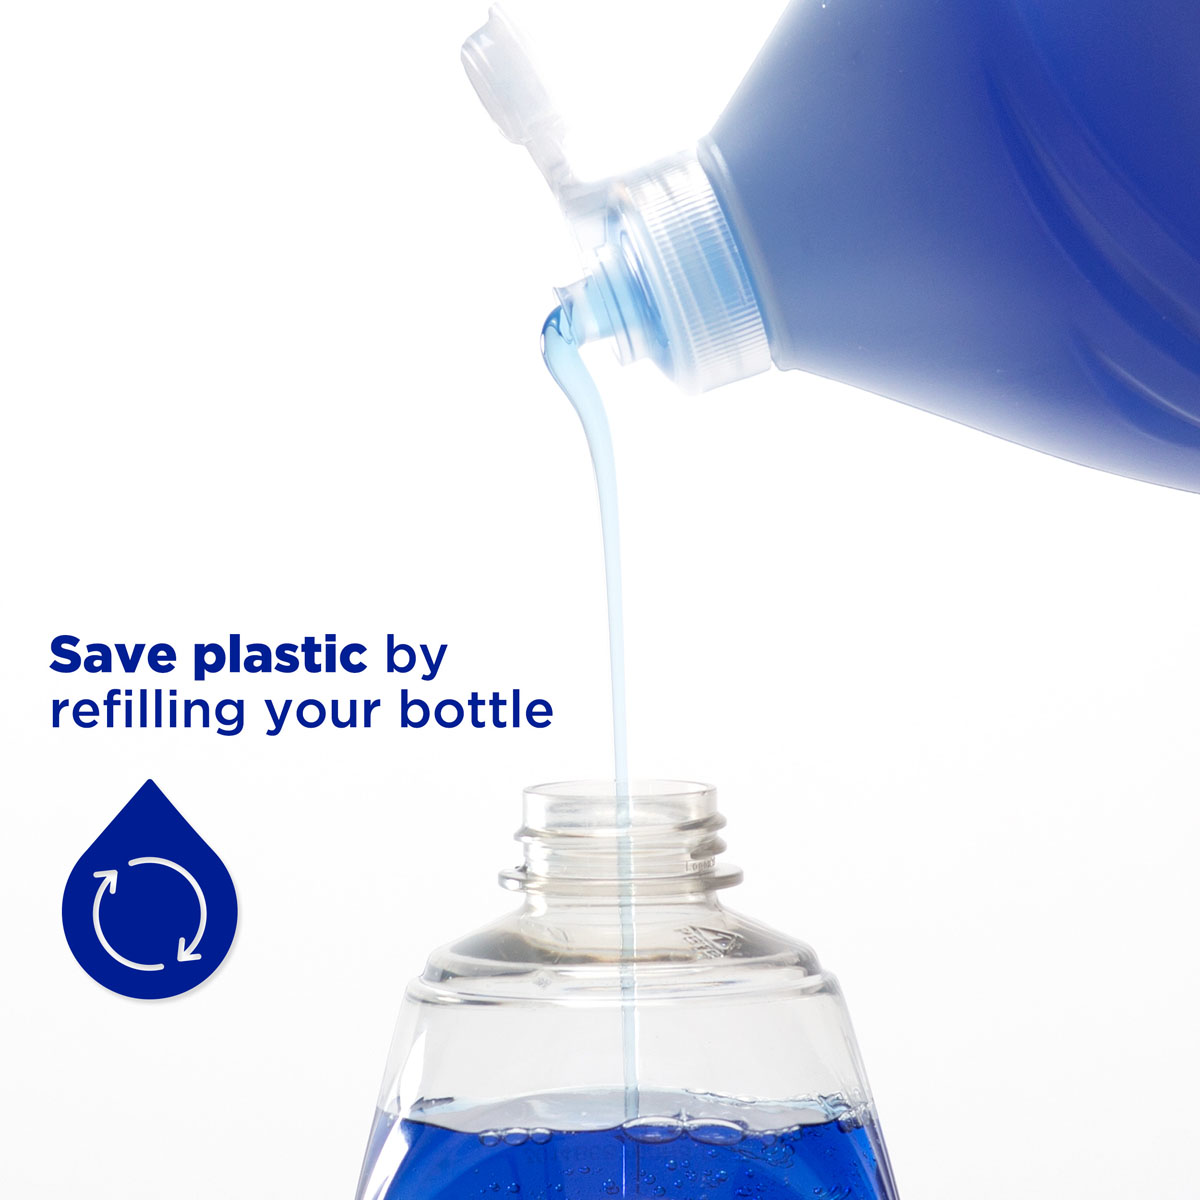 Save plastic by refilling your bottle